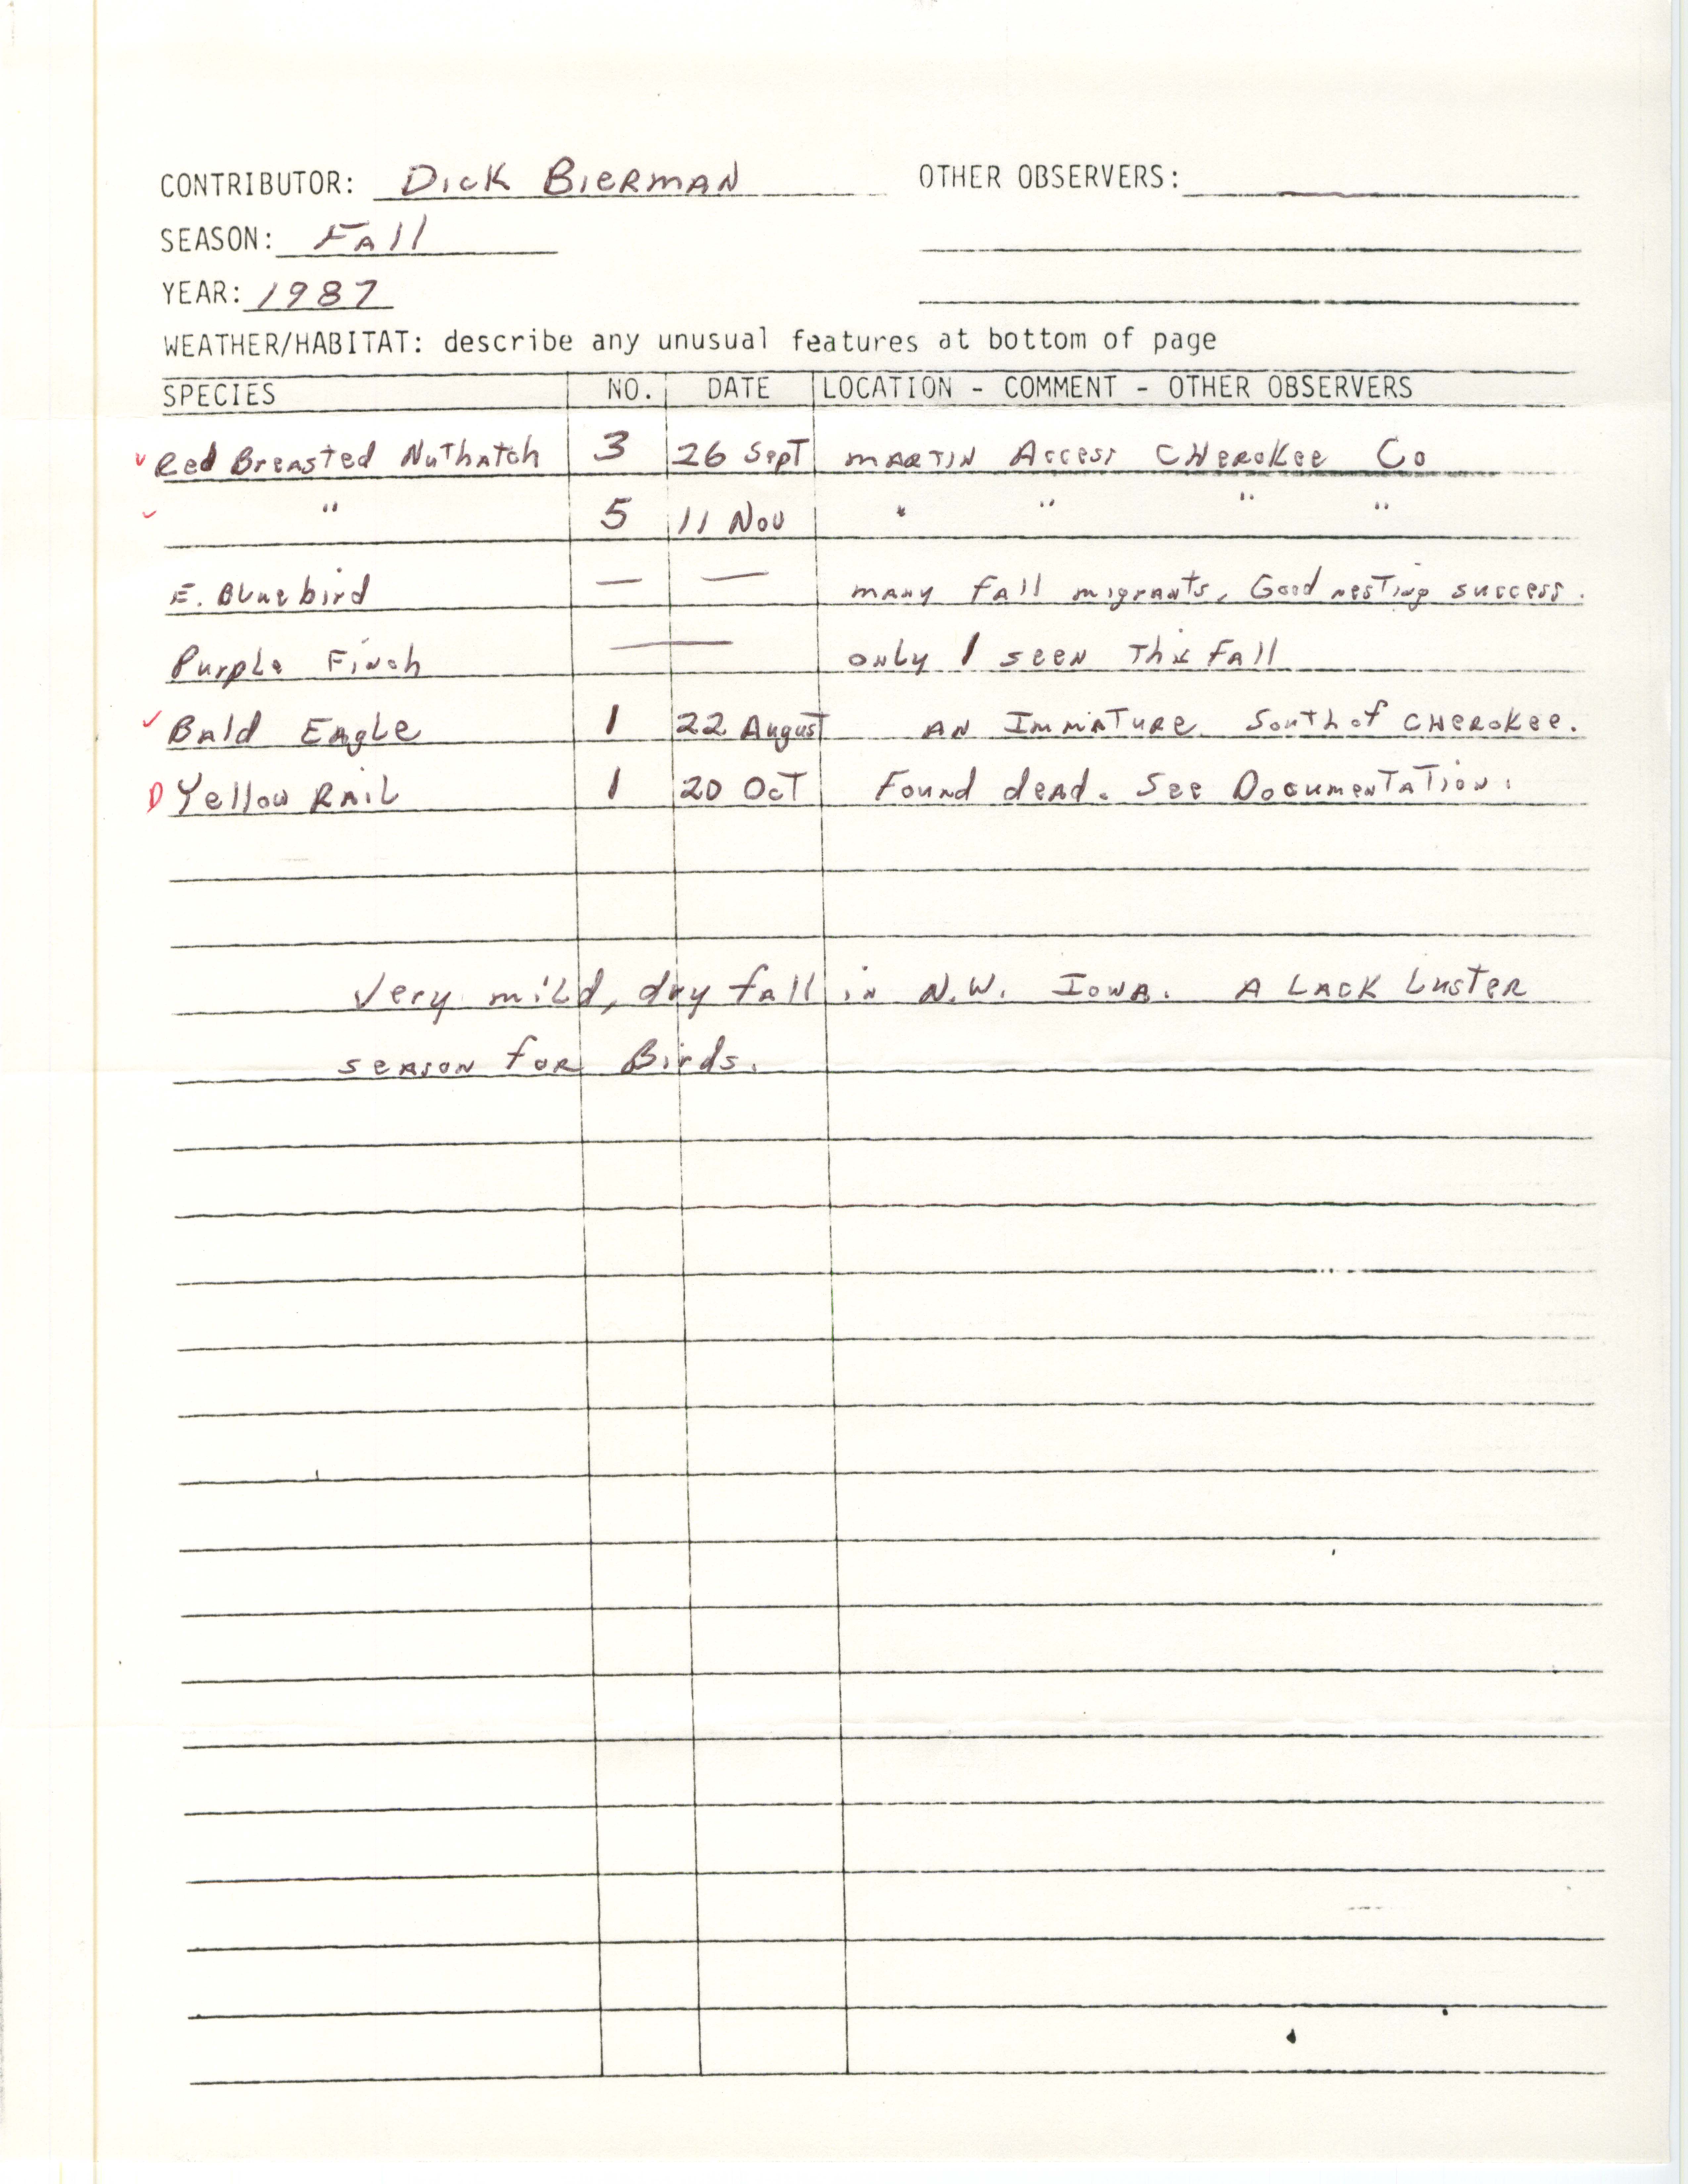 Field notes contributed by Dick Bierman, fall 1987